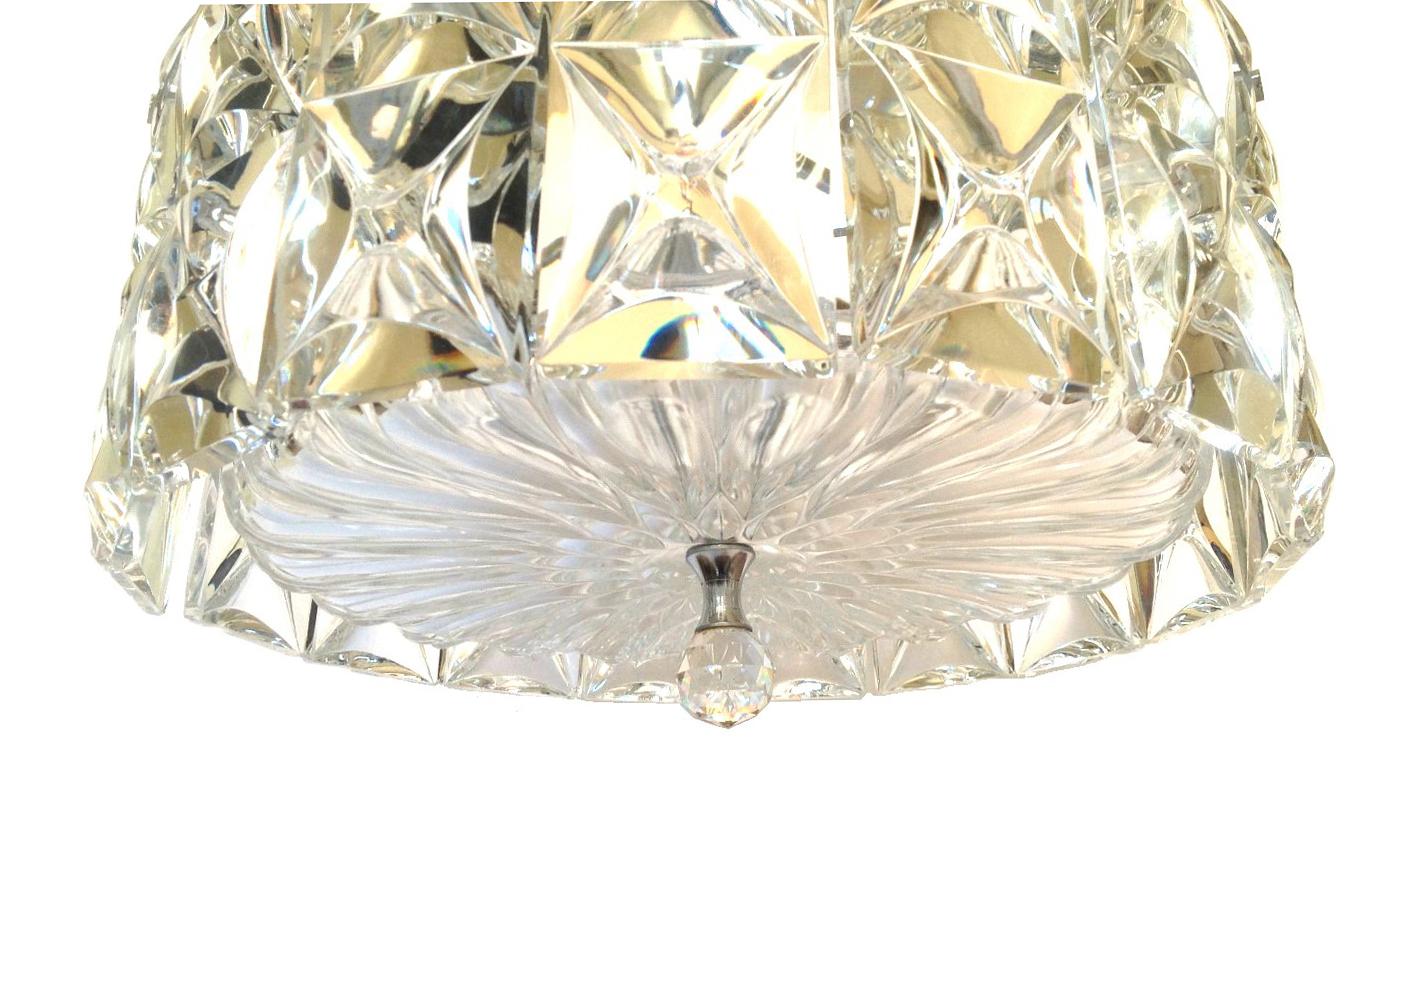 Elegant and beautiful German midcentury crystal chandelier.
This chandelier was made during the 1960s in Germany by KInkeldey.
This chandelier is composed by 10 units of clear crystals and metal structure.
The our main target is customer